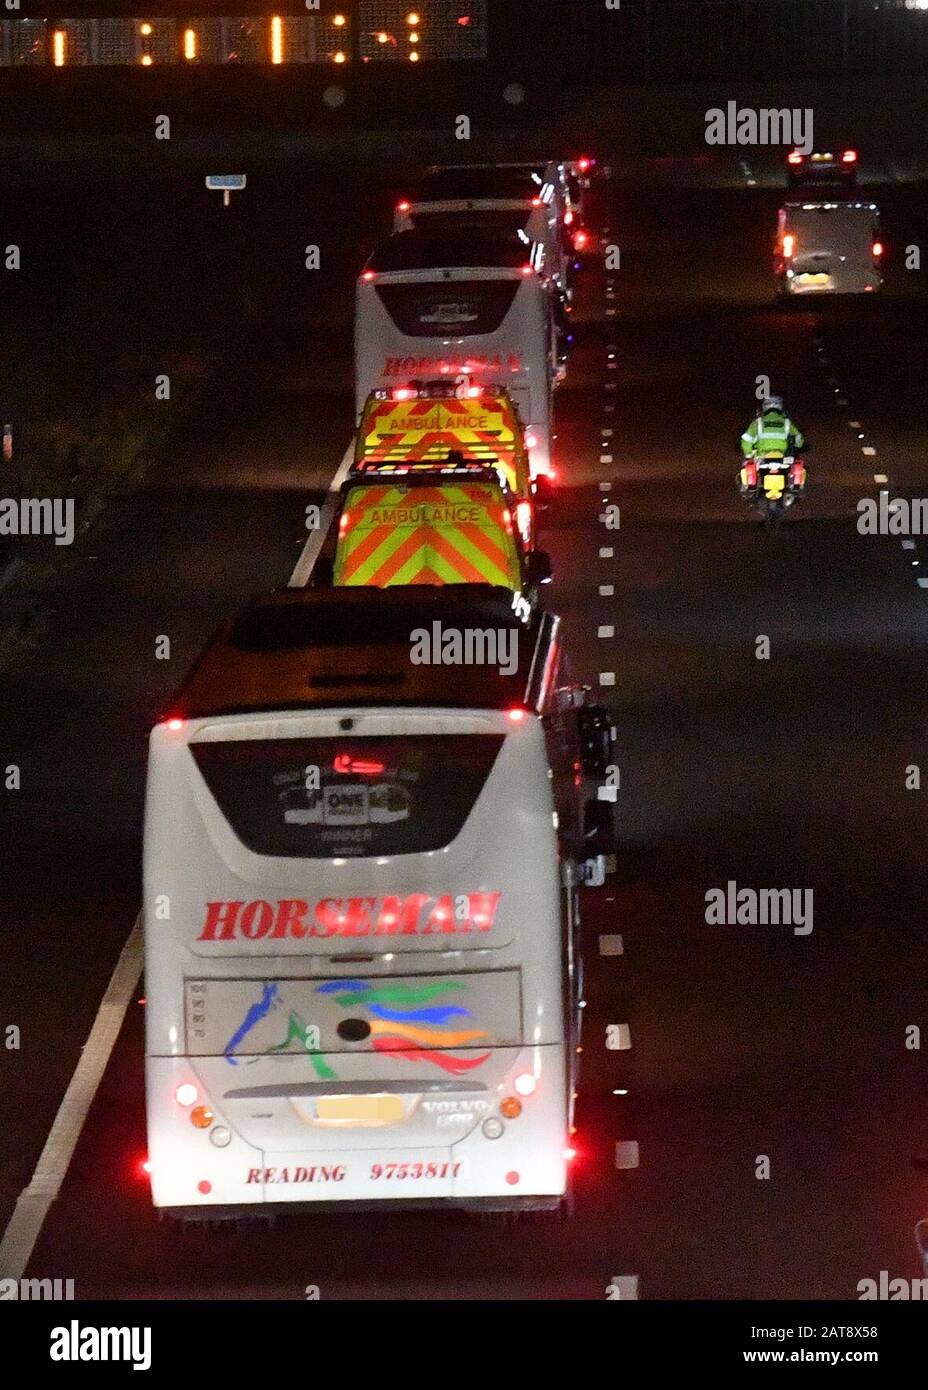 Buses carrying British nationals from the coronavirus-hit city of Wuhan in China, travelling along the M6 motorway on their way to Arrowe Park Hospital in Merseyside. The passengers arrived by plane to RAF Brize Norton in Oxfordshire before being transported to the hospital site on the Wirrall where they are set to be quarantined. Stock Photo